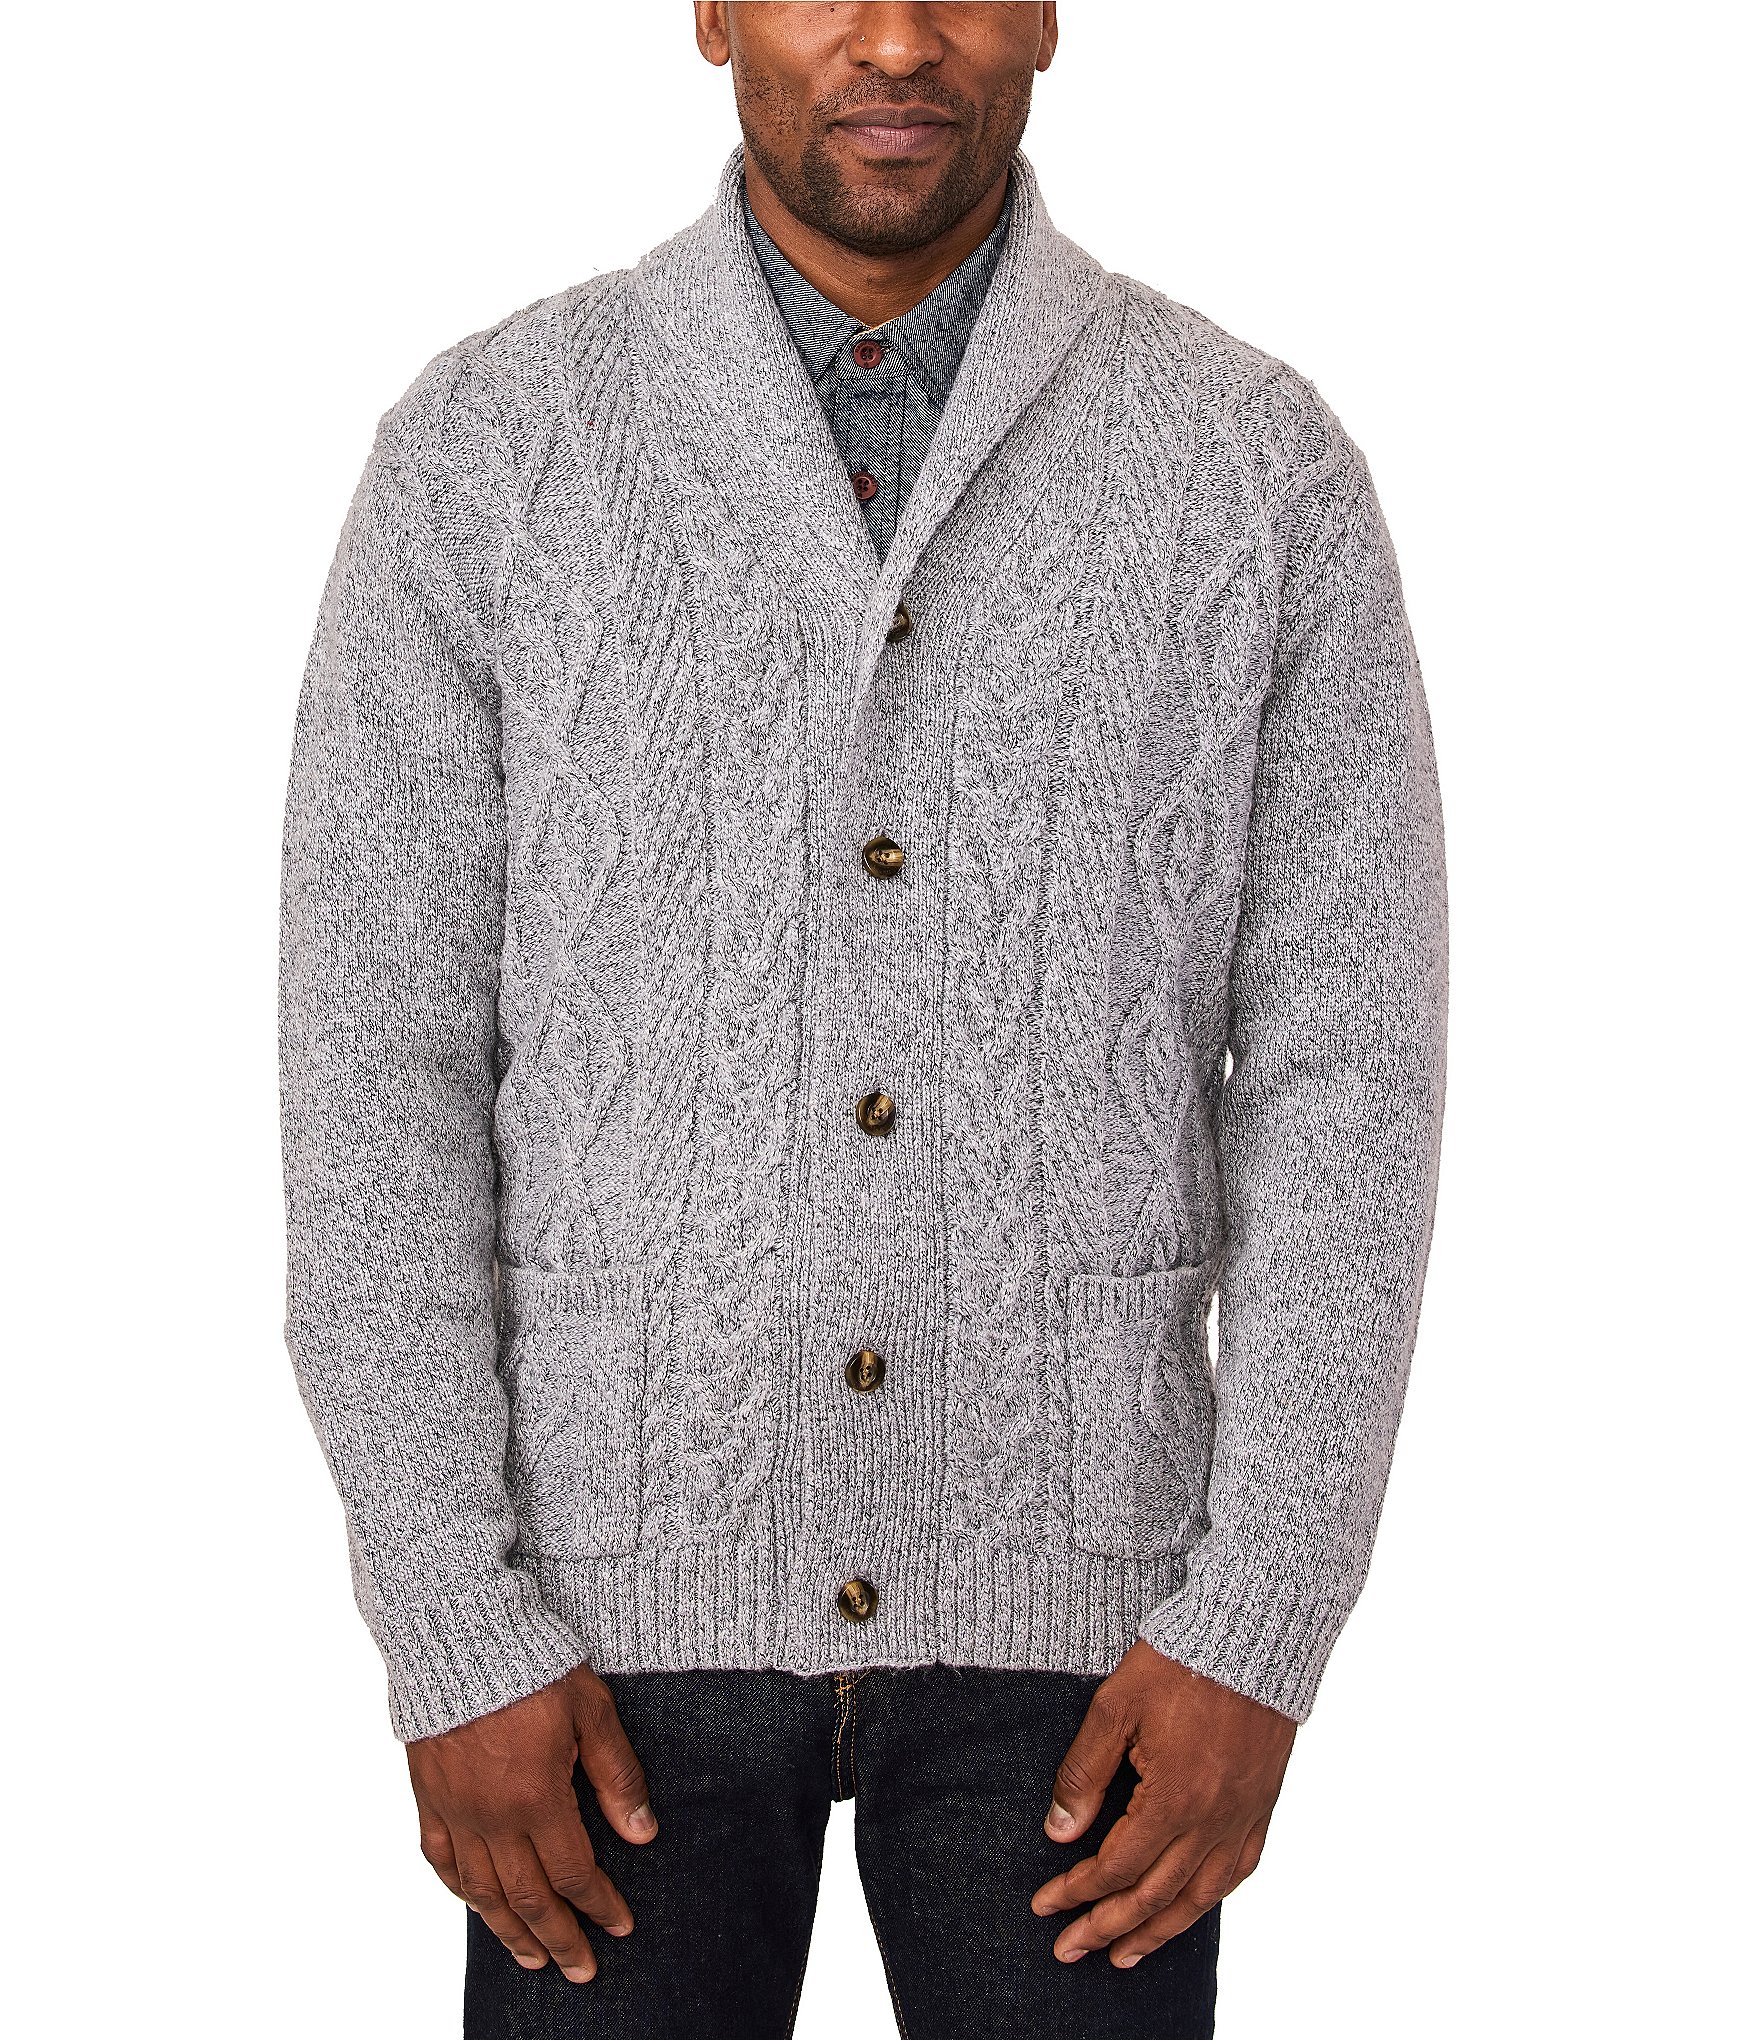  Men's Cardigan Sweaters - Men's Cardigan Sweaters / Men's  Sweaters: Clothing, Shoes & Jewelry